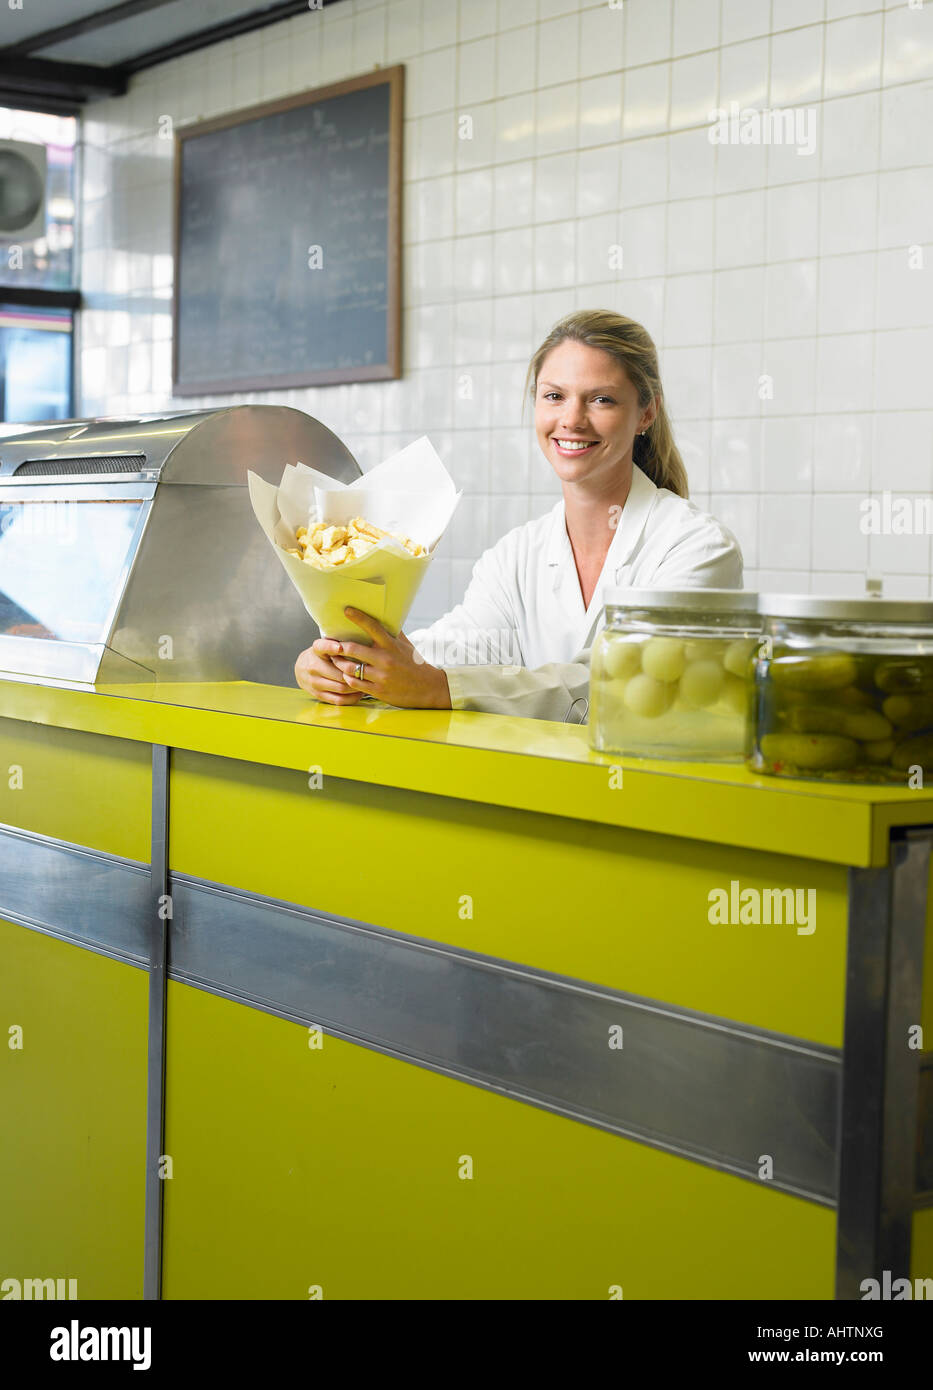 Young woman serving in fish and chip shop, smiling, portrait Stock Photo